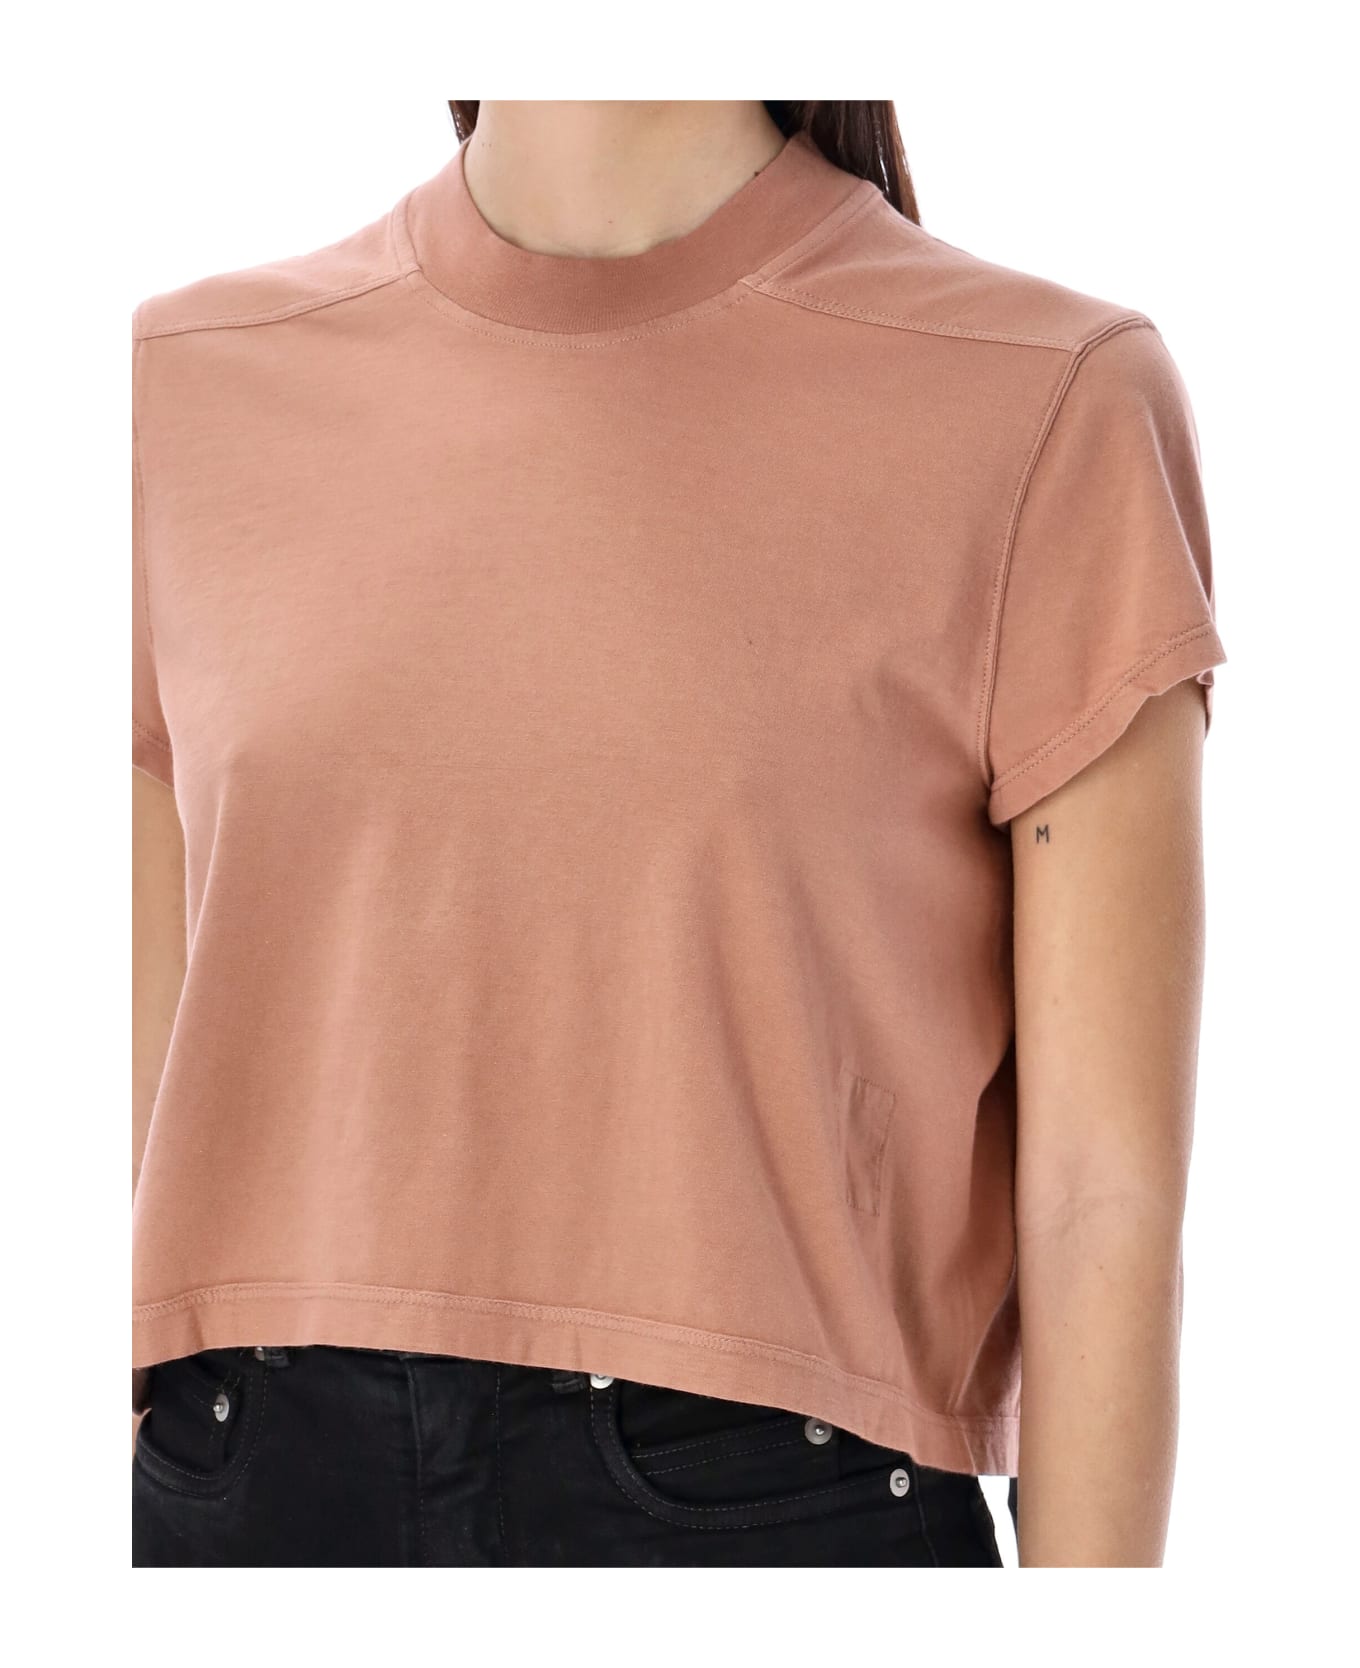 DRKSHDW Cropped Small Level T - PINK